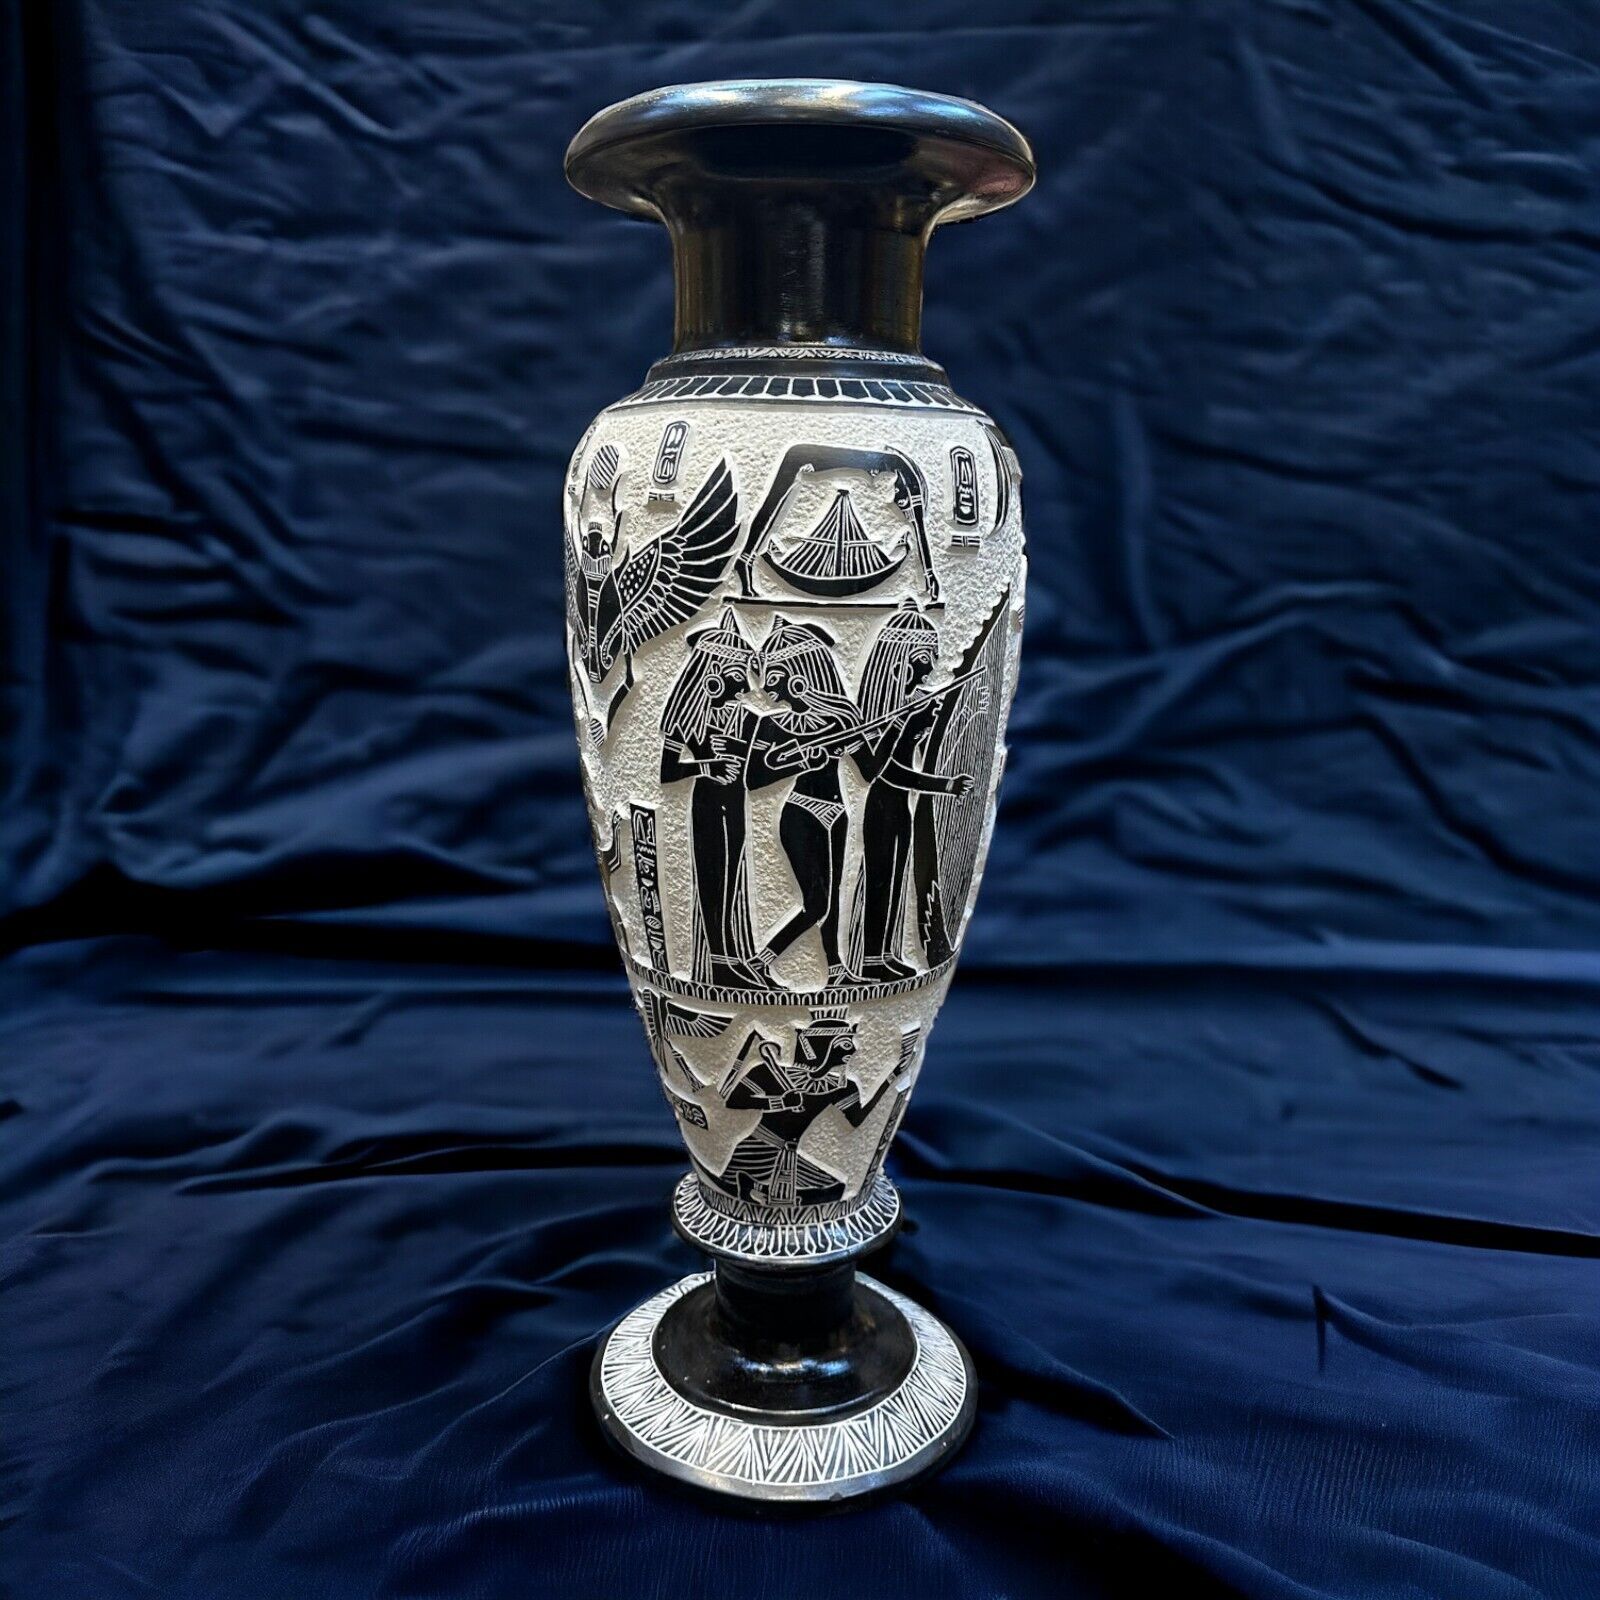 Exquisite Antique Pharaonic Vase: Authentic Egyptian Artifact with Ancient